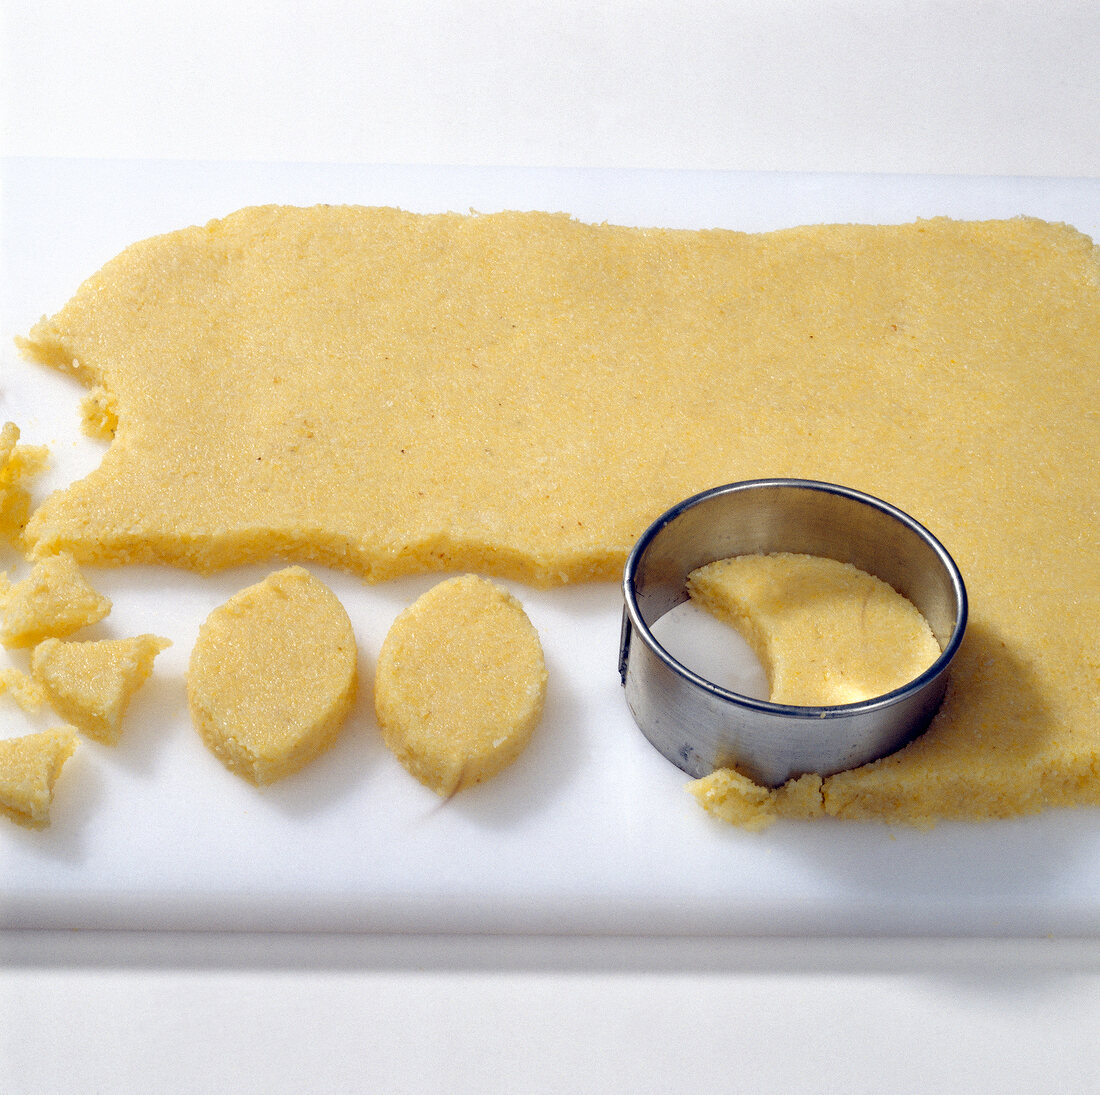 Dough being cut with round cookie cutter on cutting board